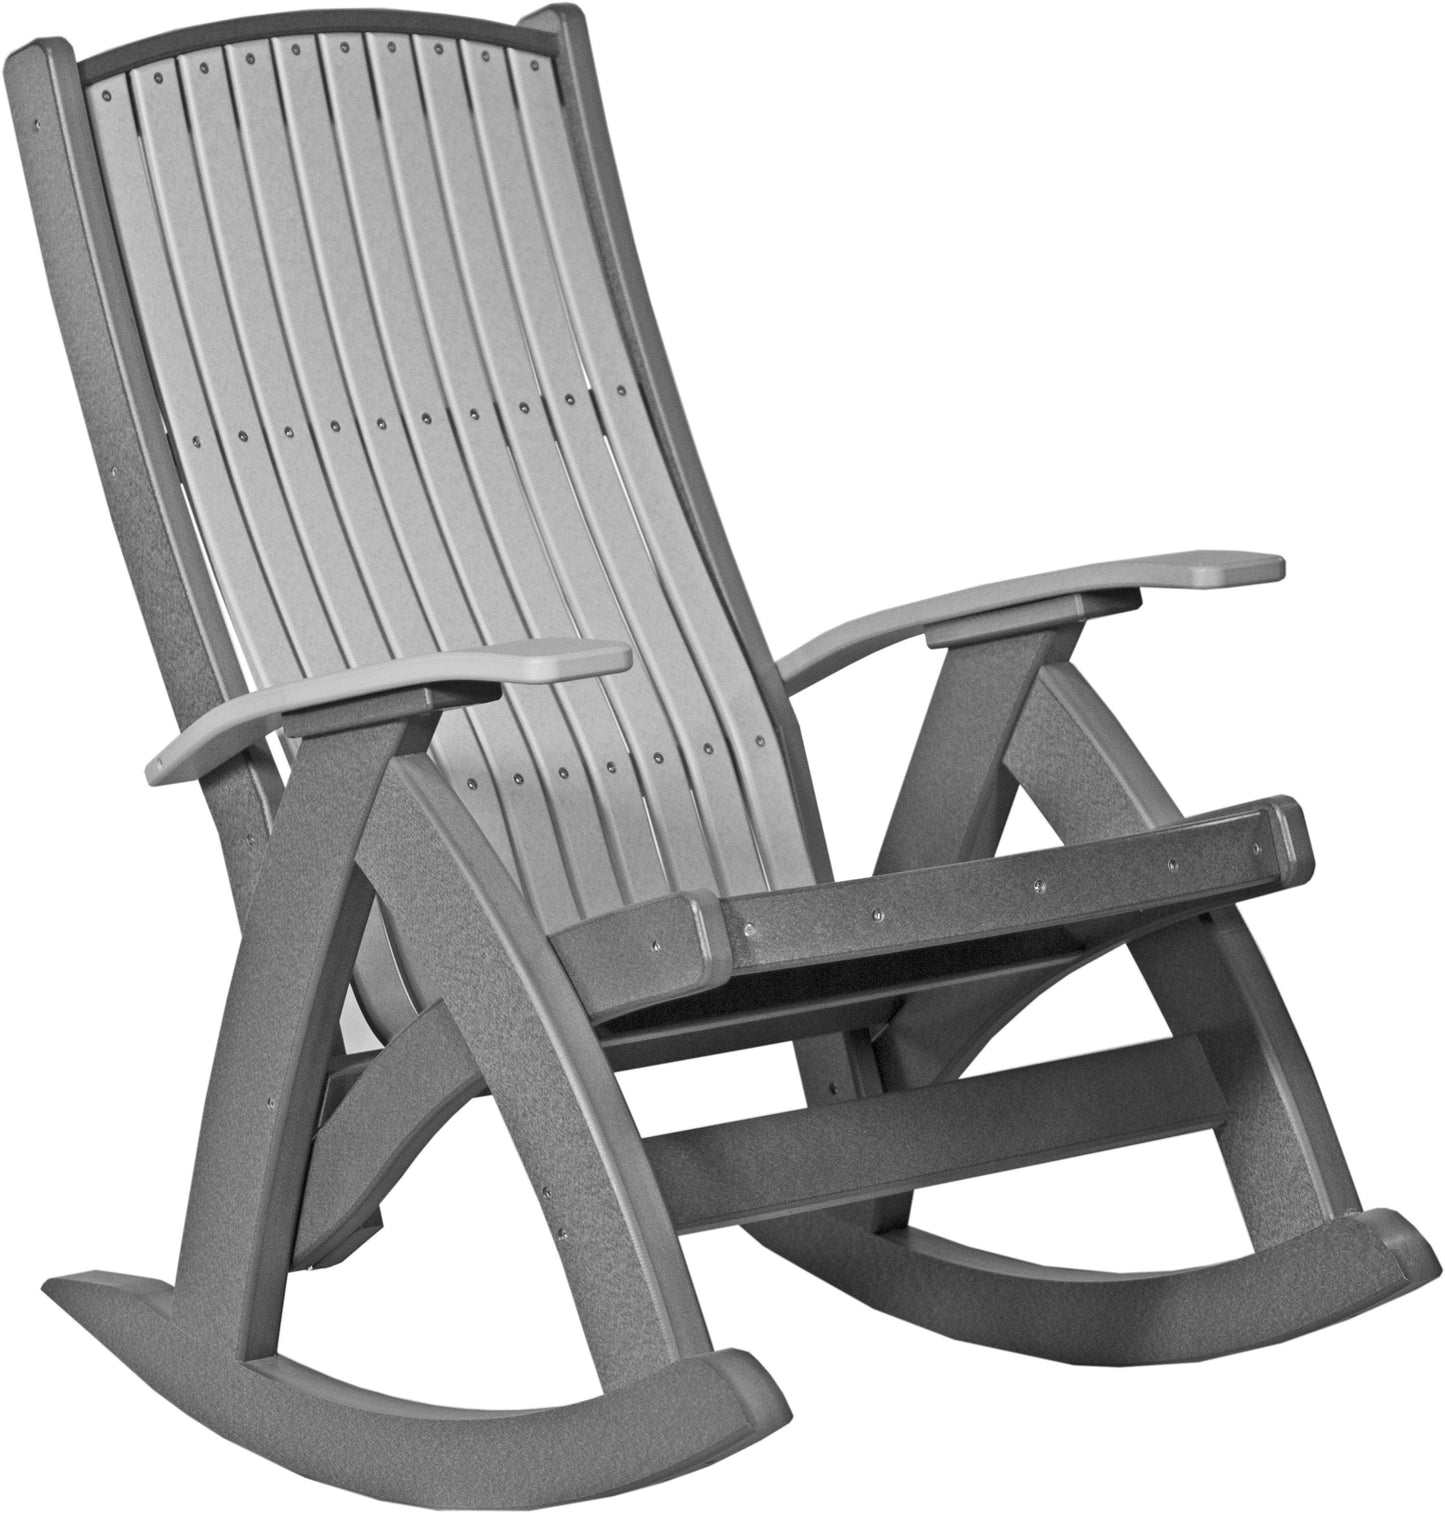 LuxCraft Recycled Plastic Comfort Rocking Chair - LEAD TIME TO SHIP 3 TO 4 WEEKS